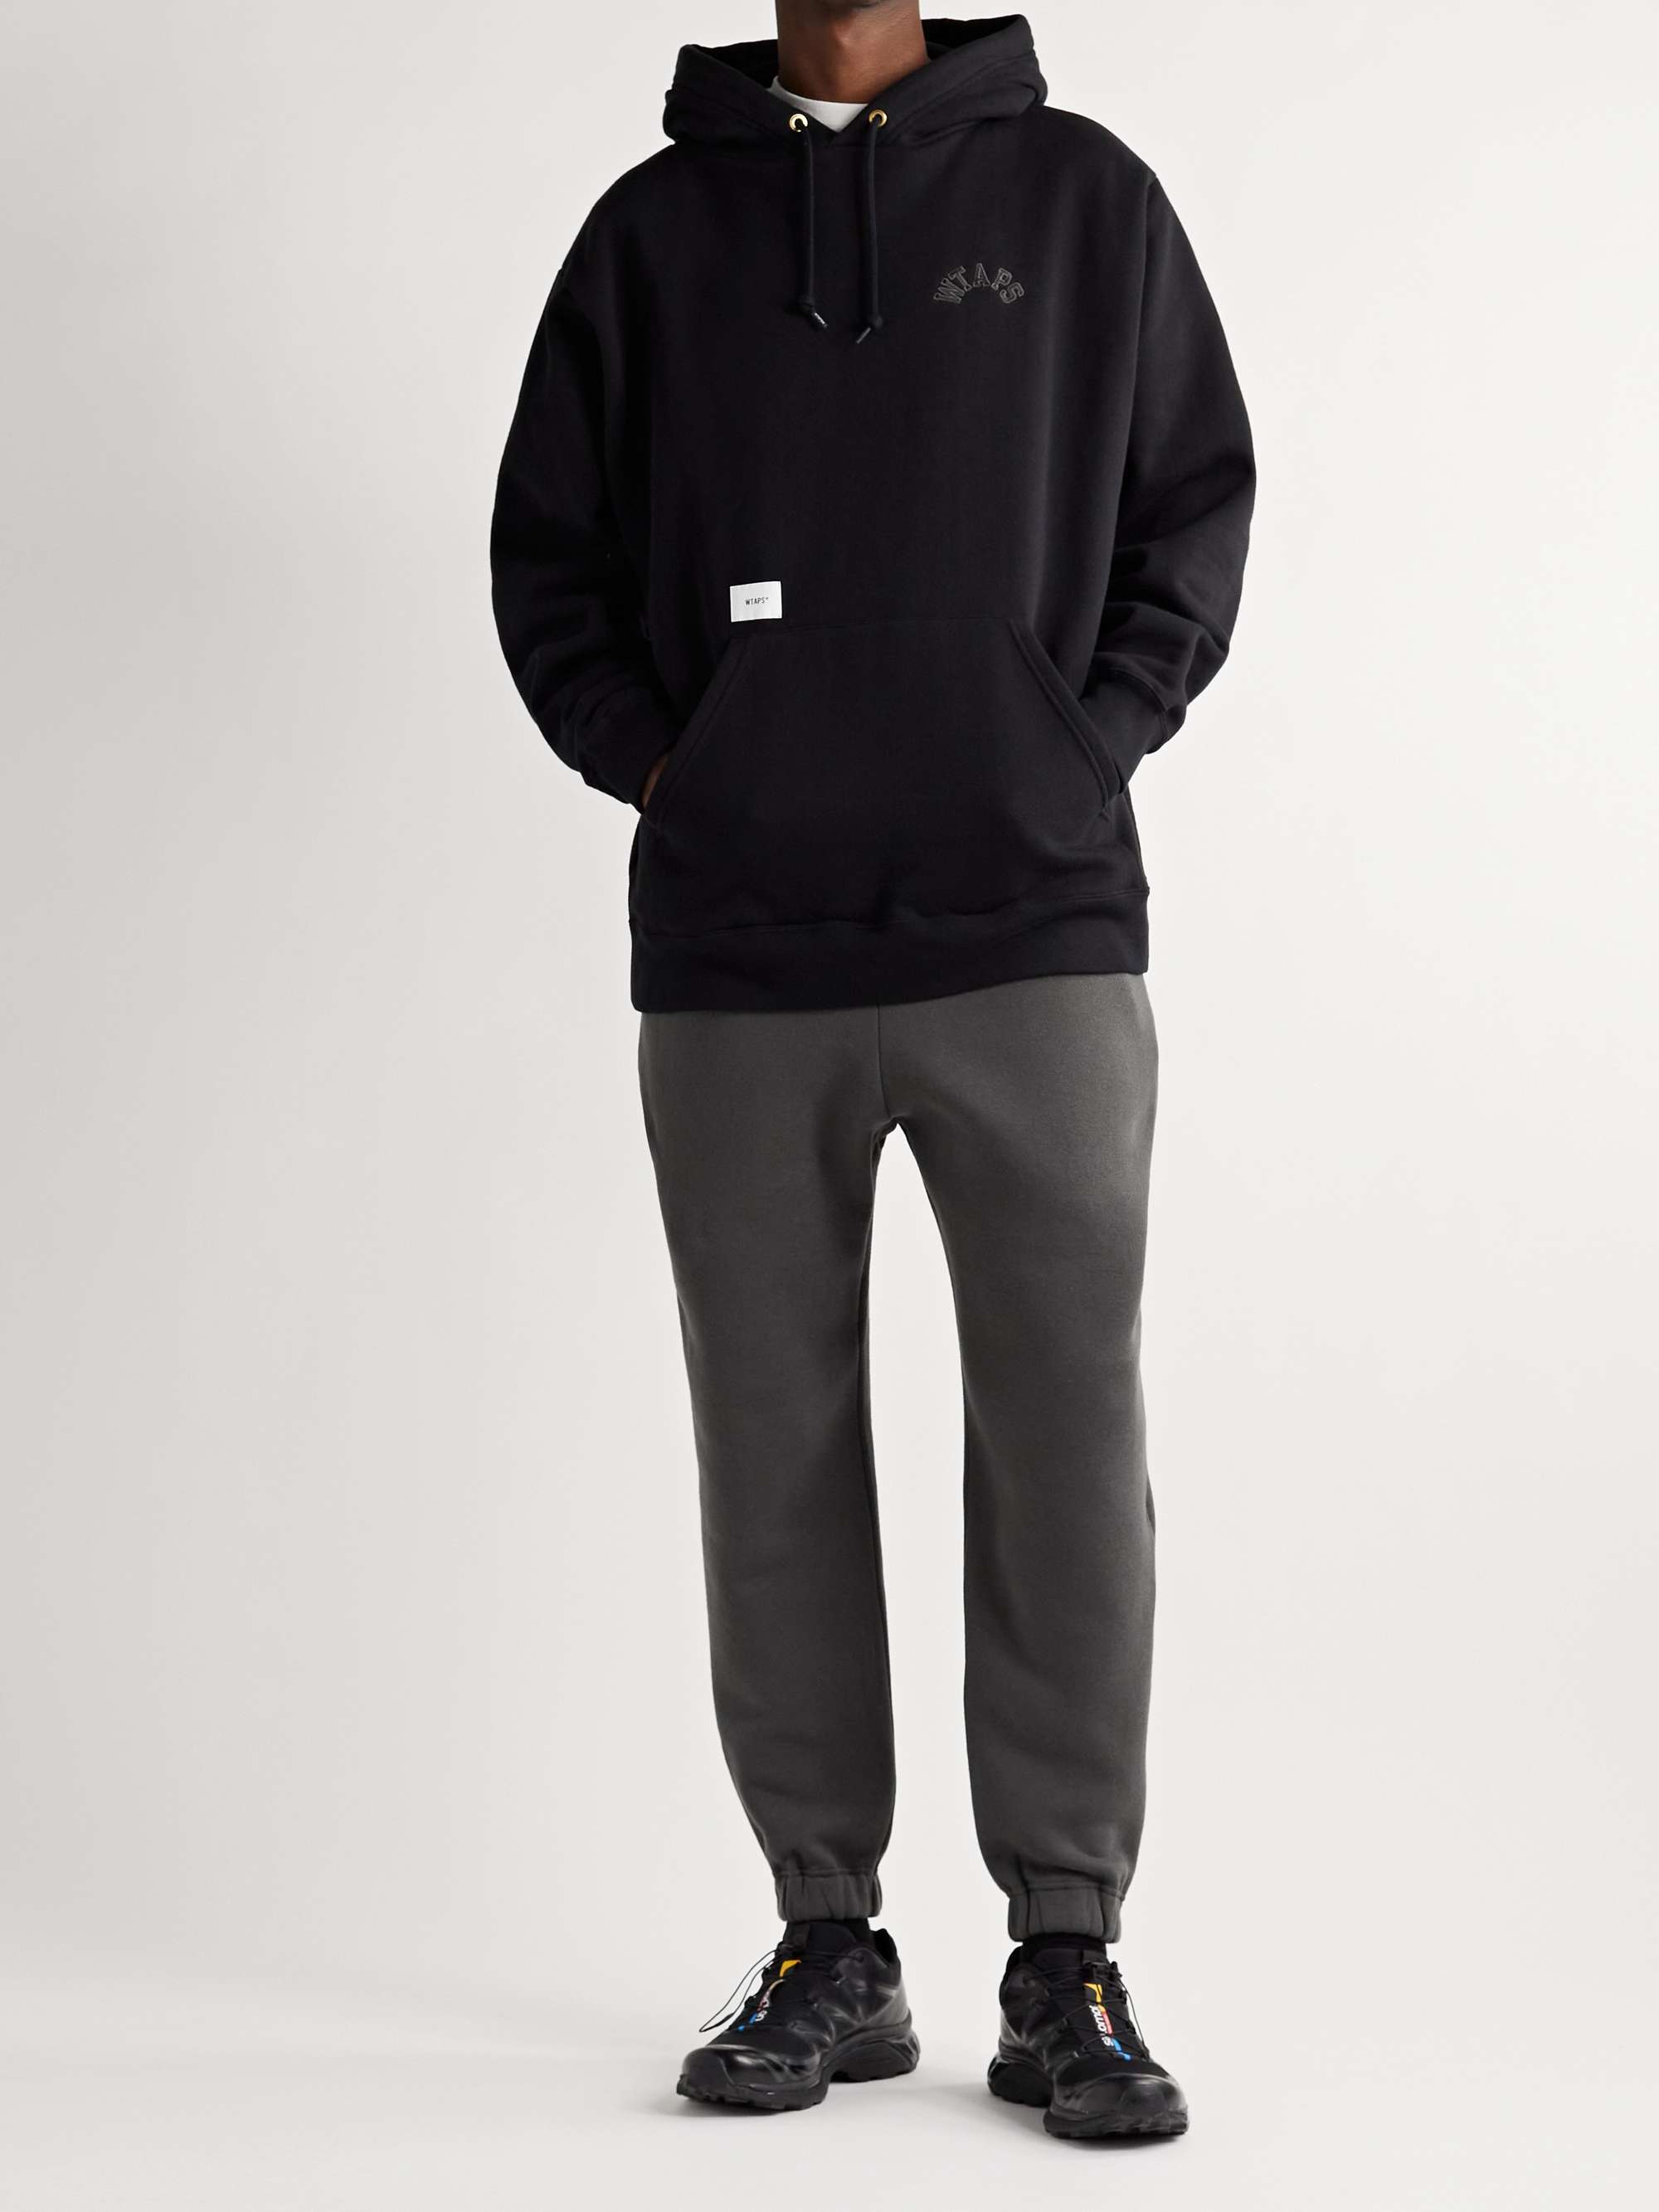 WTAPS Tapered Cotton-Jersey Sweatpants